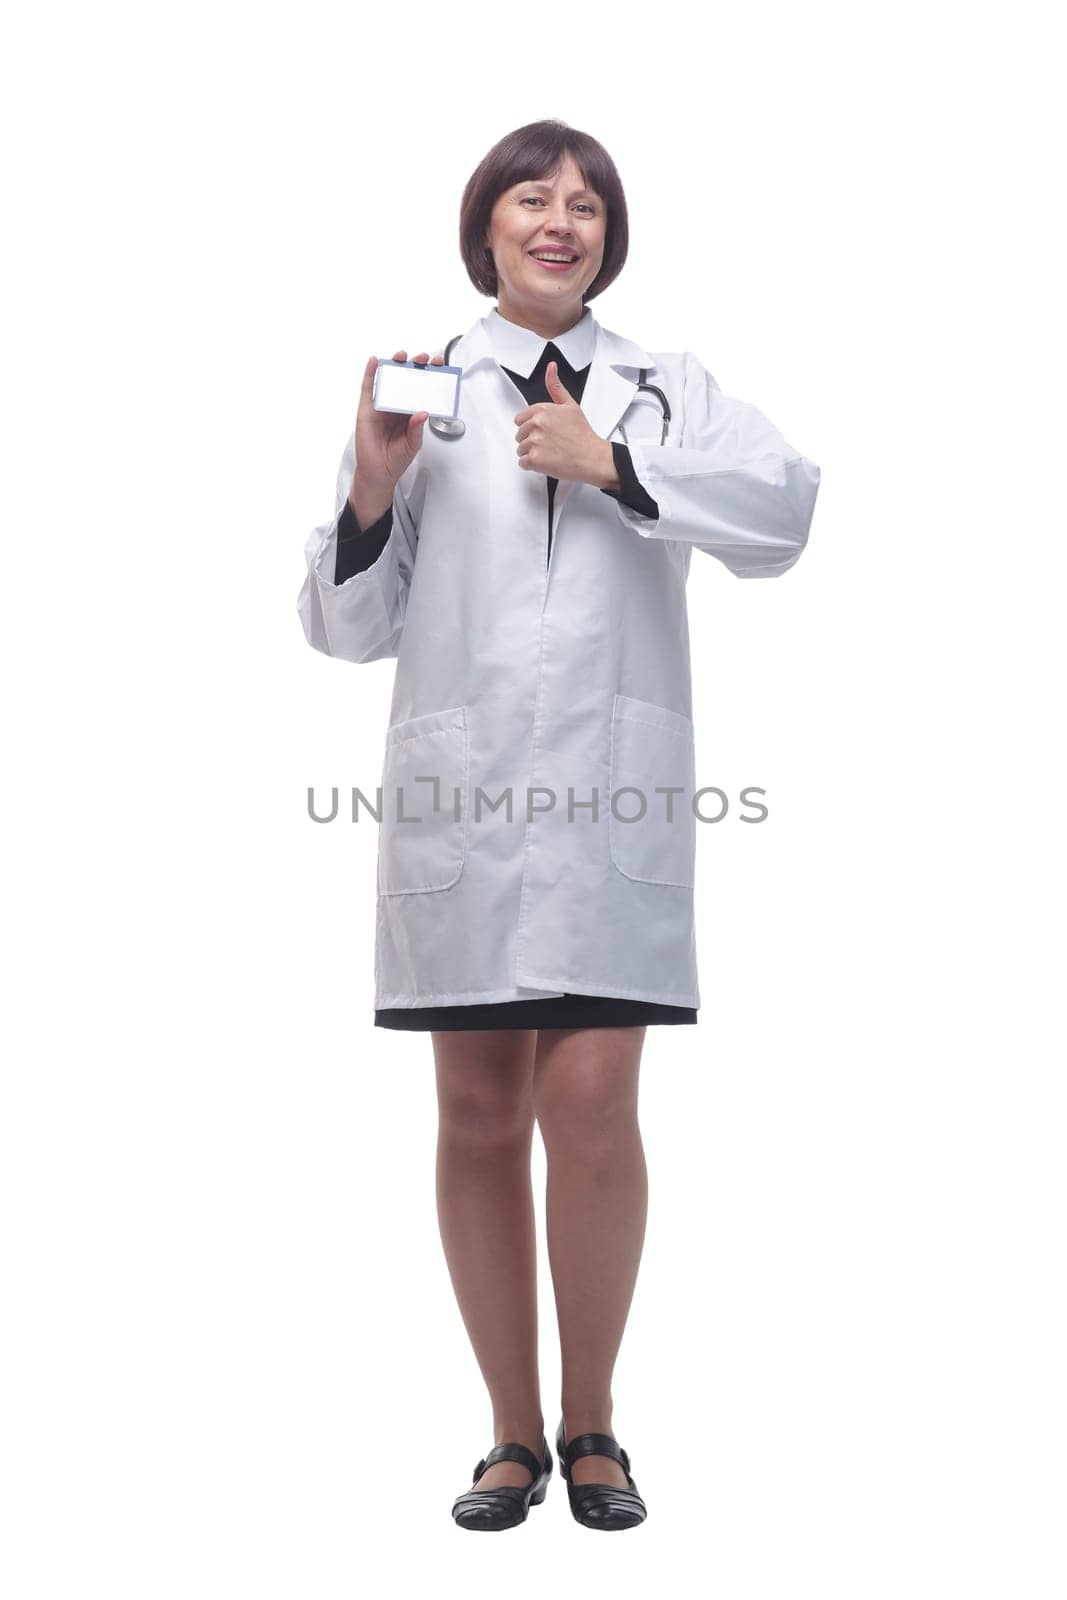 in full growth. young woman doctor showing her business card . isolated on a white background.